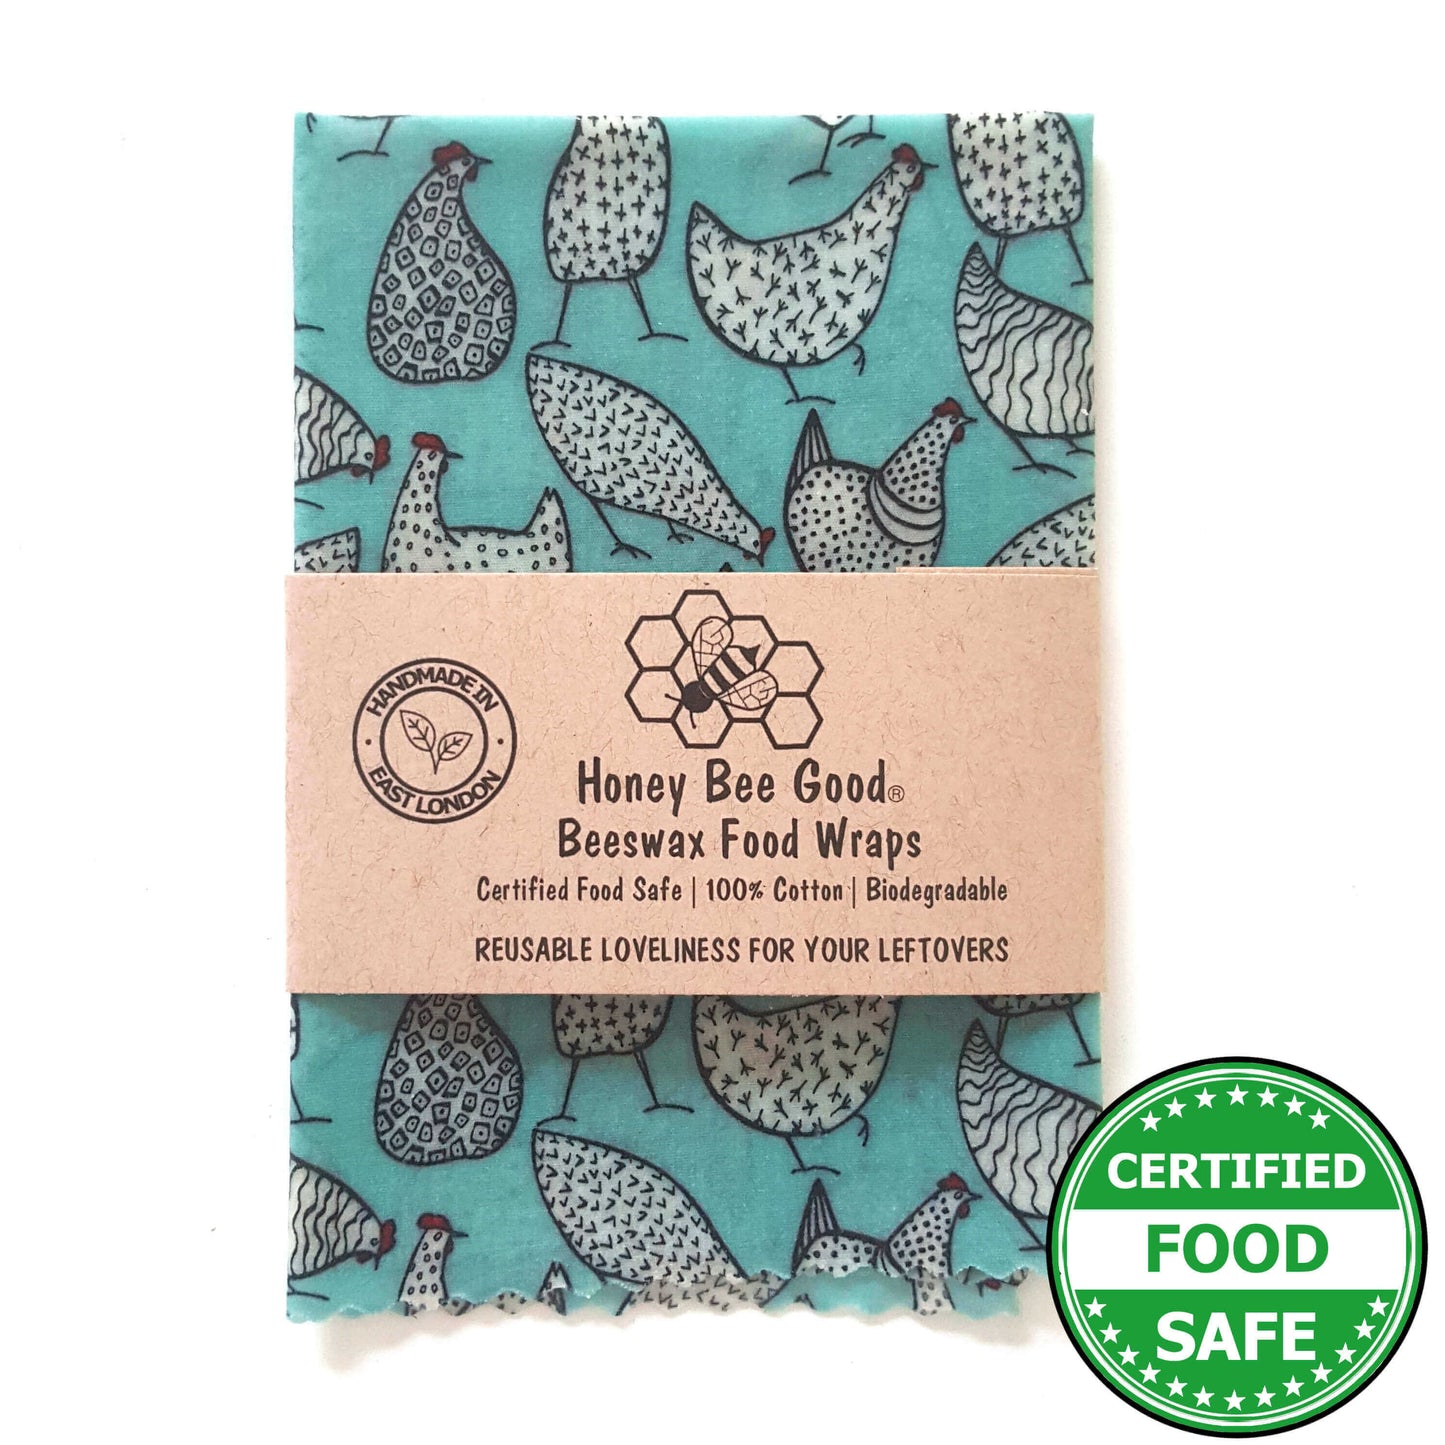 Reusable Beeswax Food Wraps 100% Hand Made in the UK by Honey Bee Good. Planet-Kind single large beeswax wrap in Happy Hens pattern